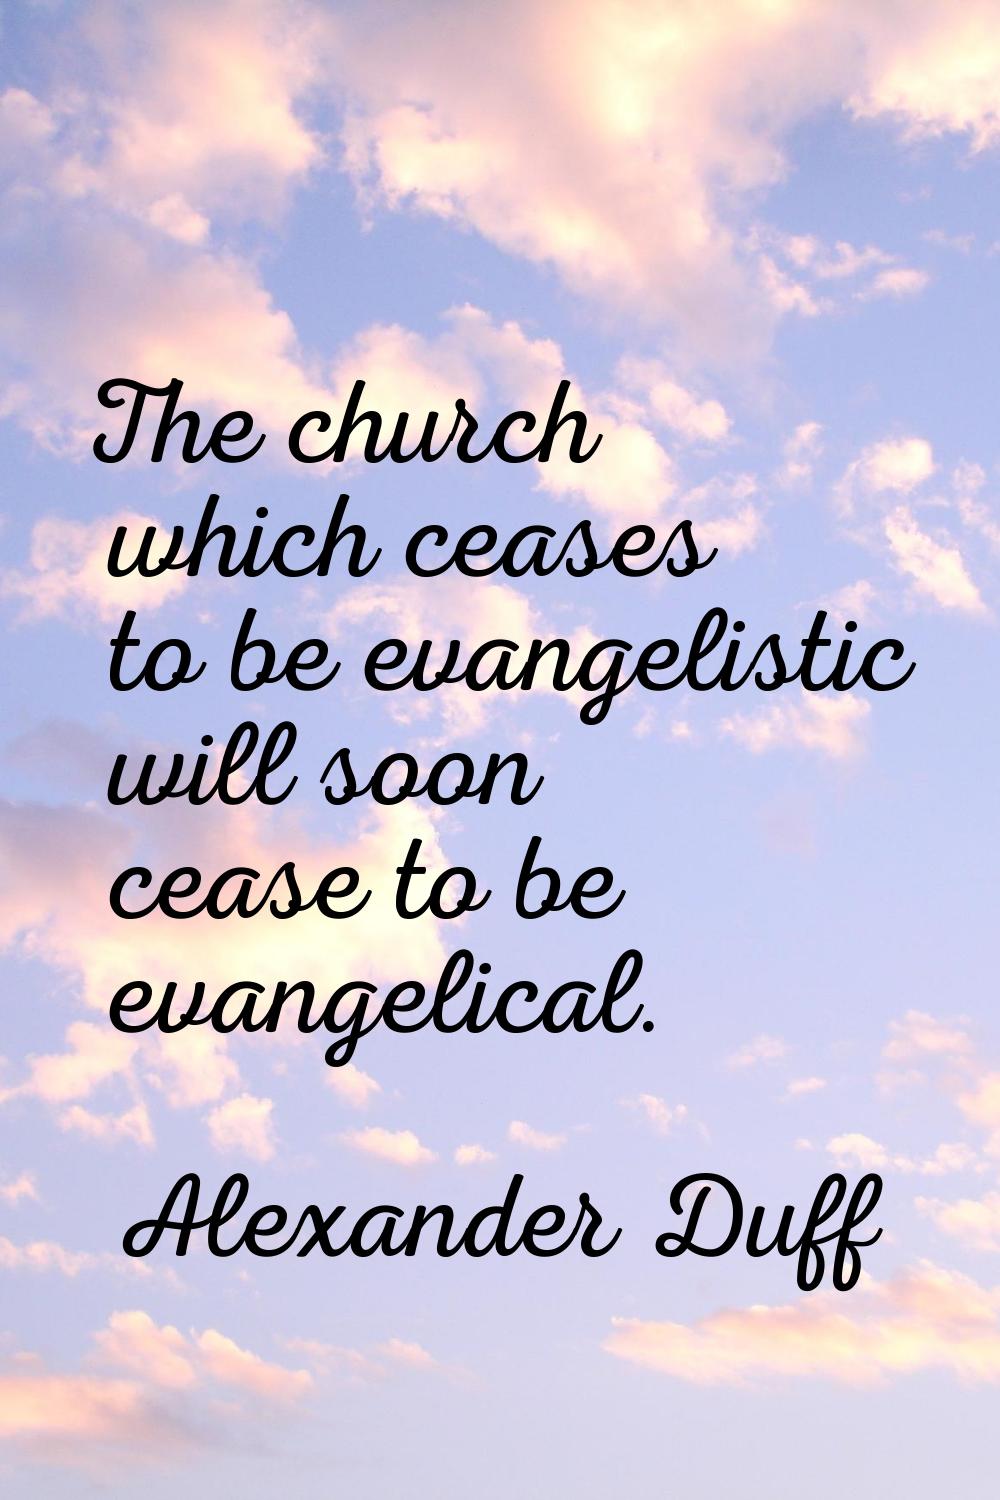 The church which ceases to be evangelistic will soon cease to be evangelical.